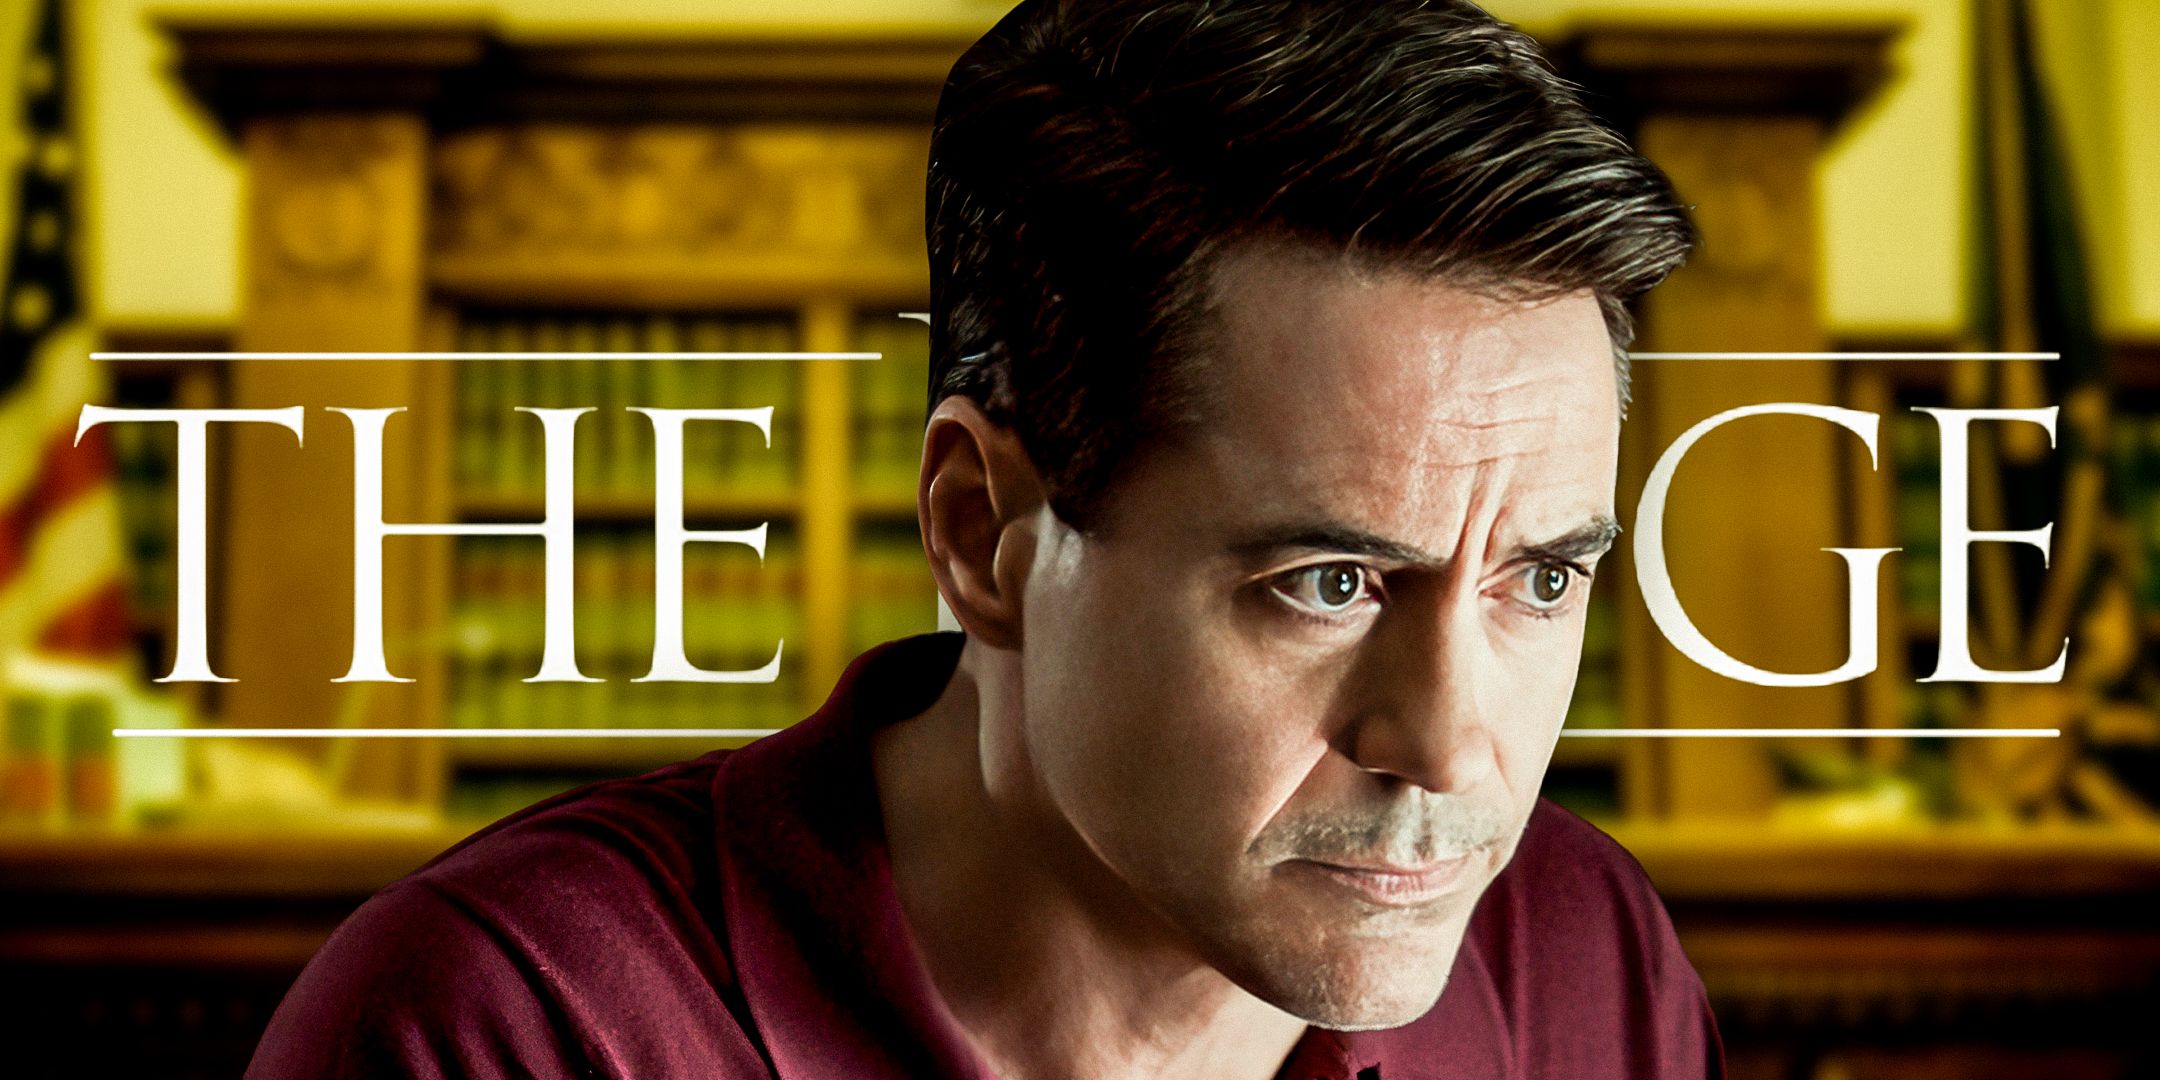 Robert Downey Jr. as Hank Palmer in front of a podium and bookshelf and the logo for The Judge (2014)